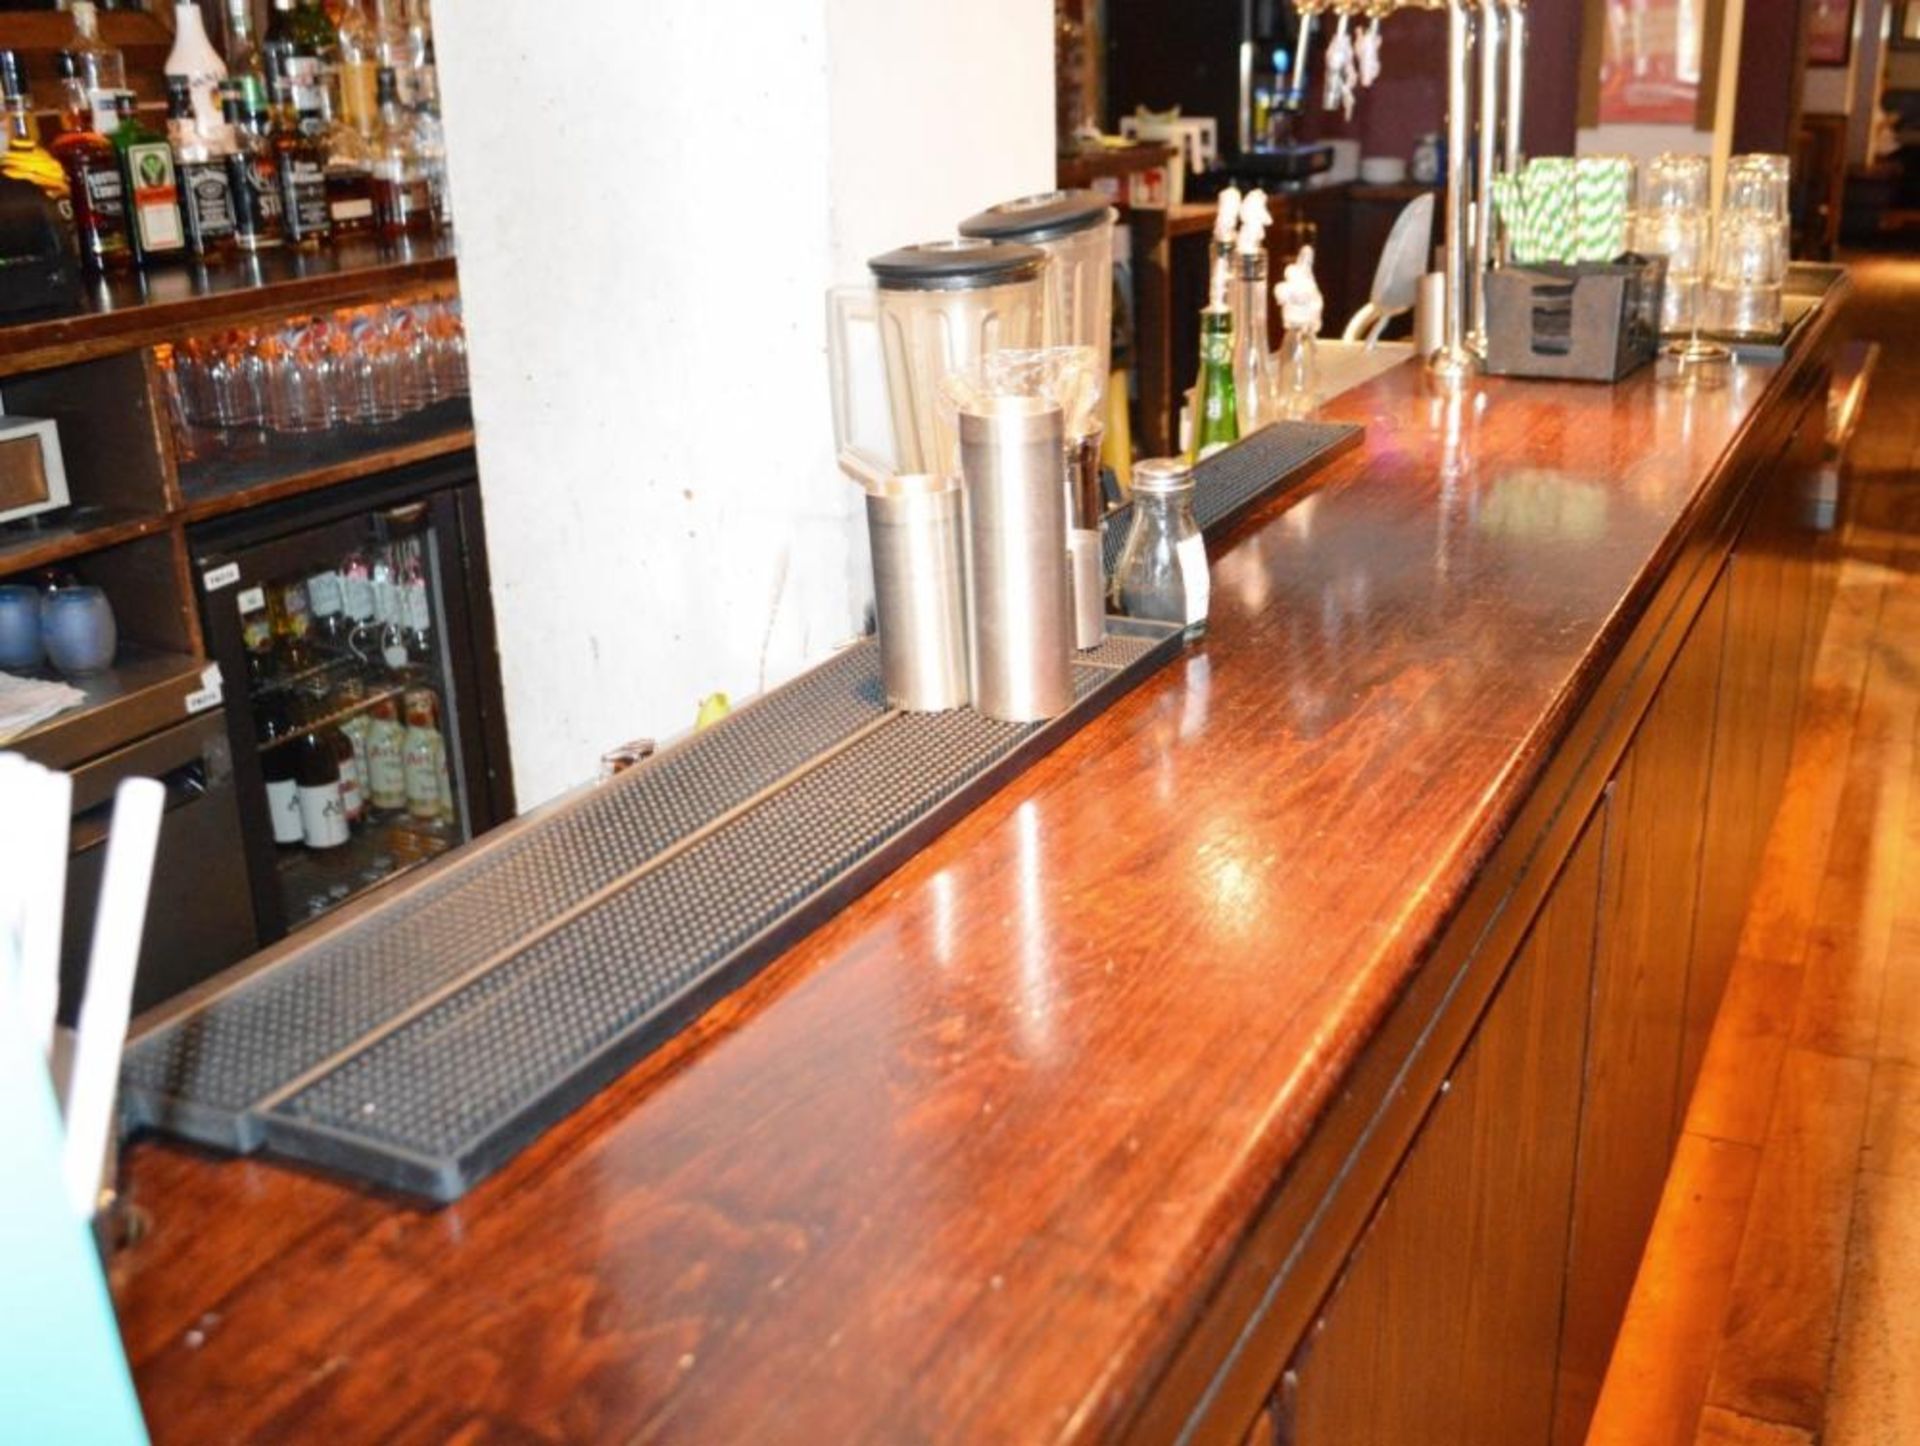 1 x Pub / Restaurant Bar From Mexican Themed Restaurant - Includes Both Front Counter And Back Bar U - Image 5 of 10